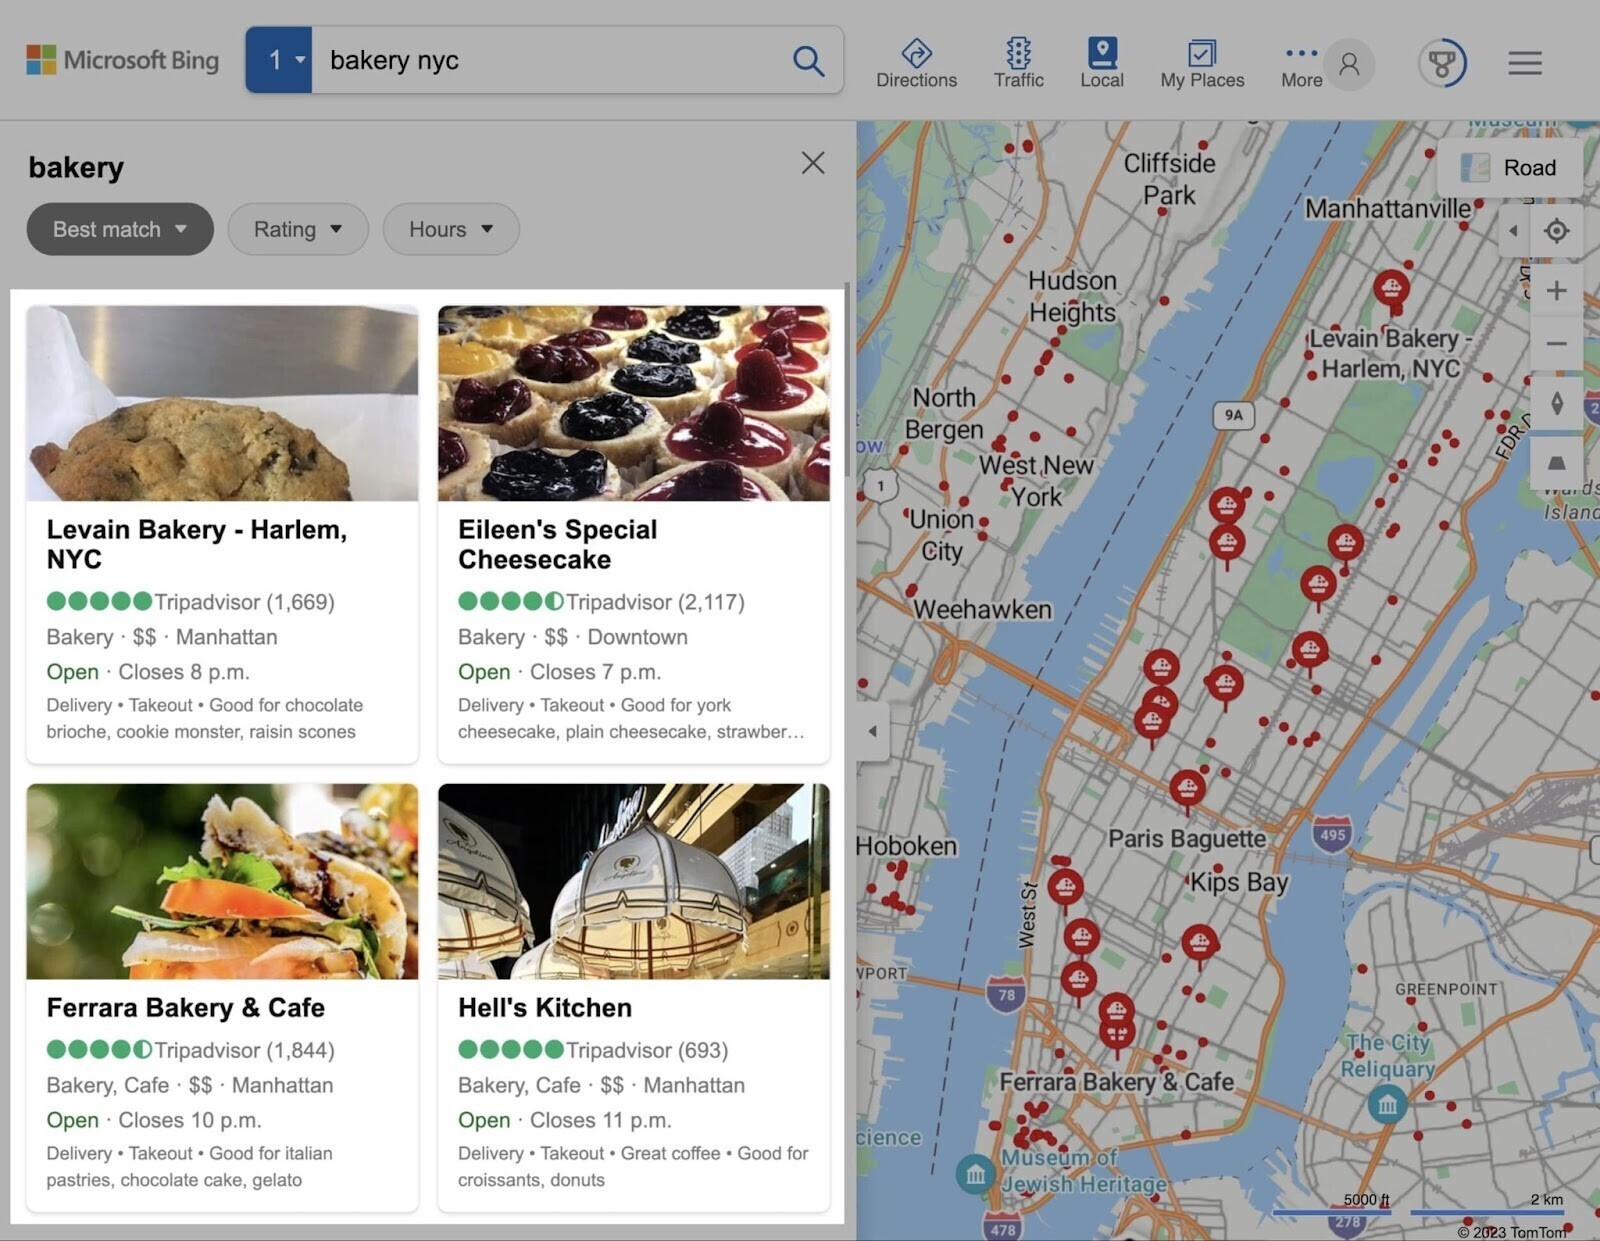 Bing Maps results also displays business listings with images